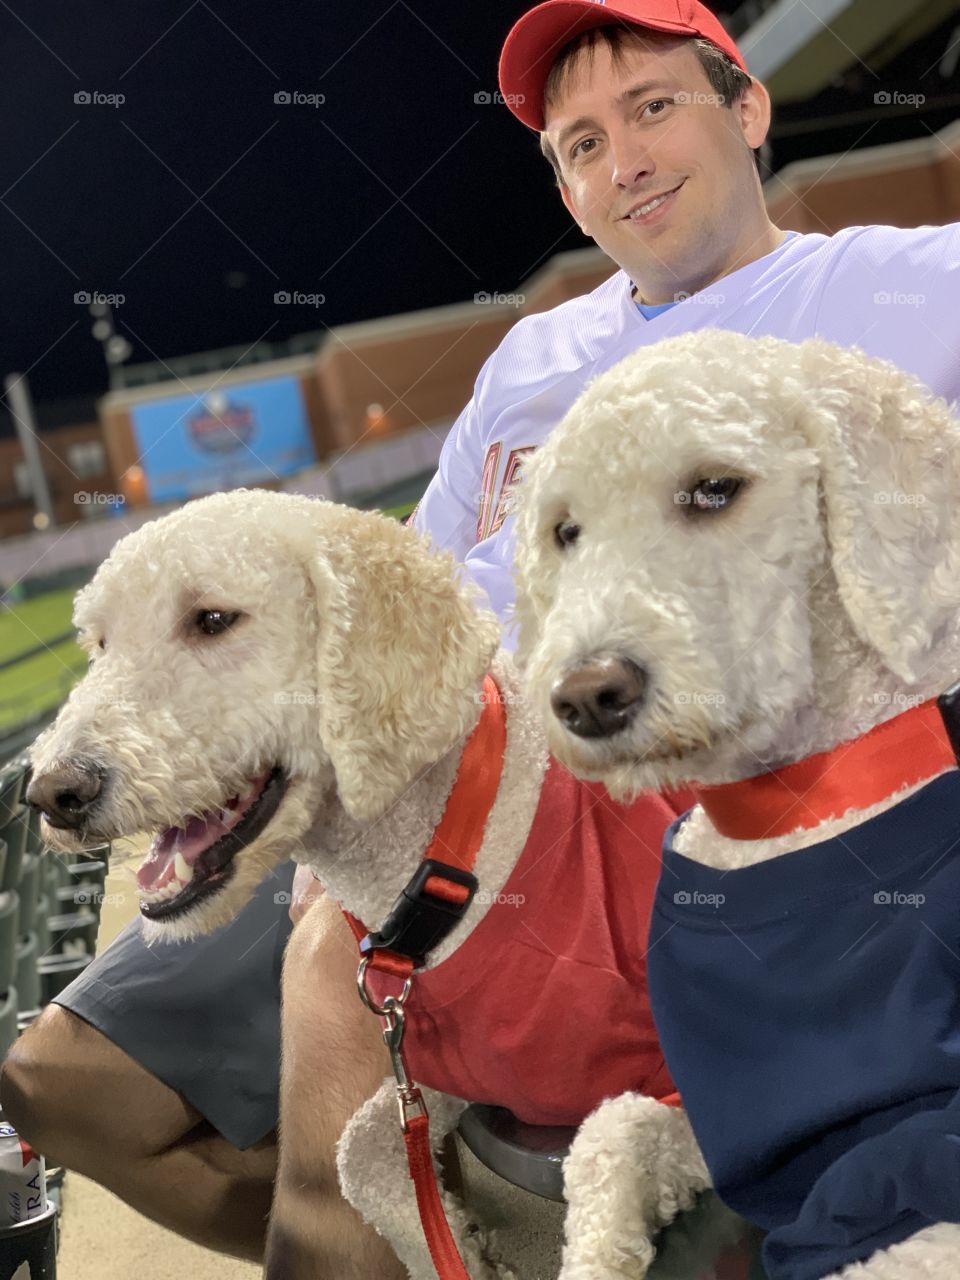 Goldendoodle dogs with dad watching baseball game on a pretty spring night 